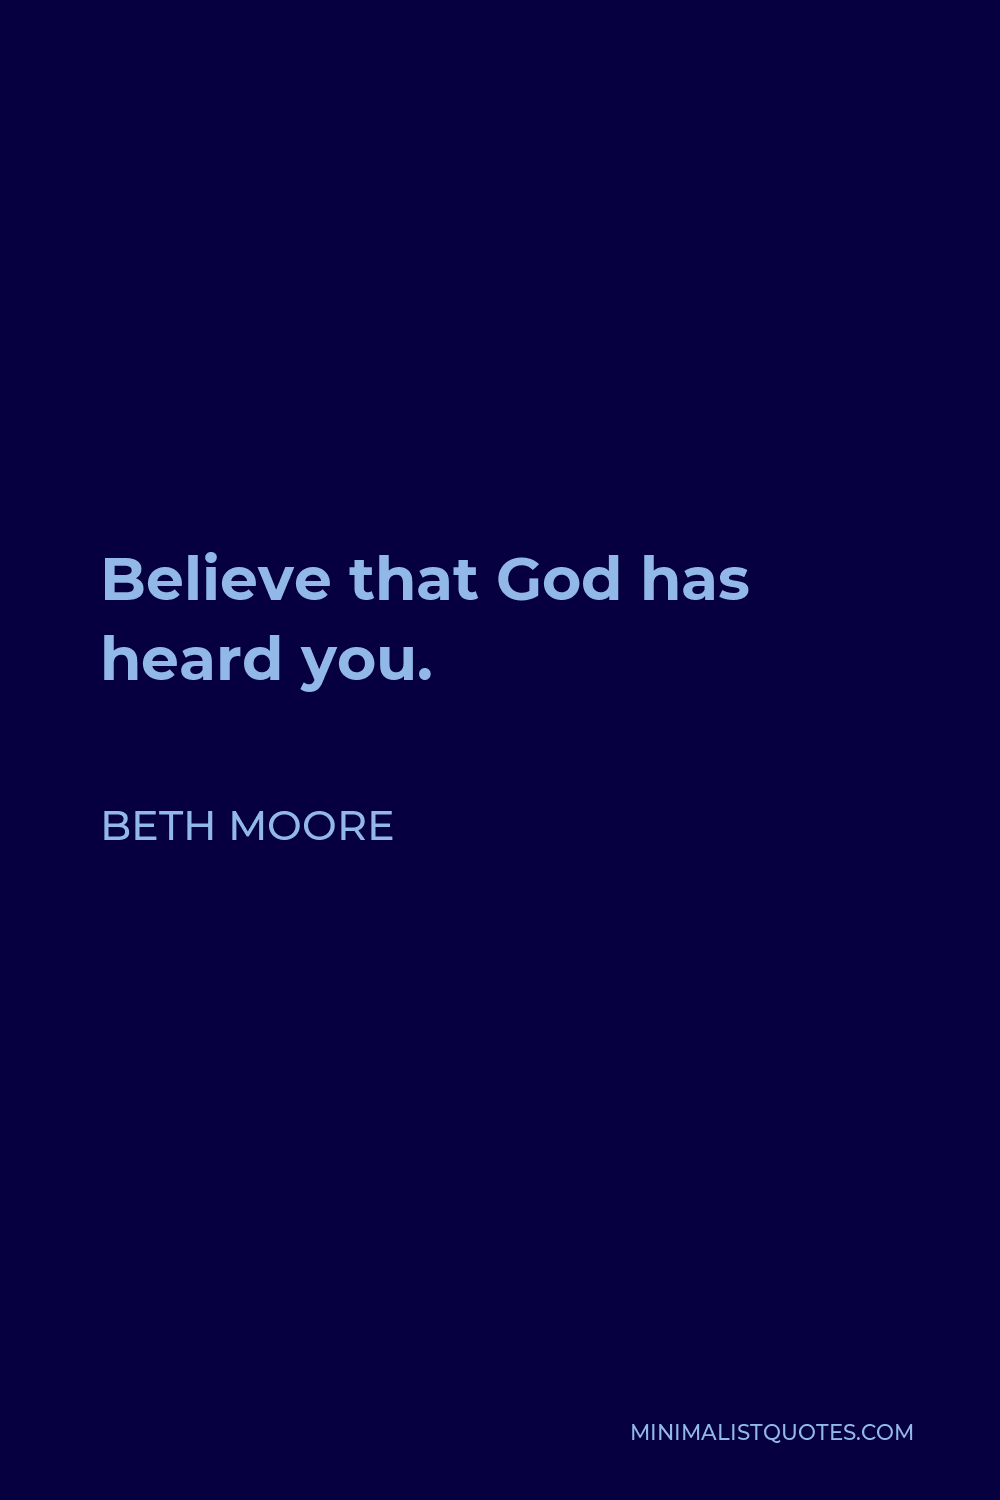 Beth Moore Quote - Believe that God has heard you.